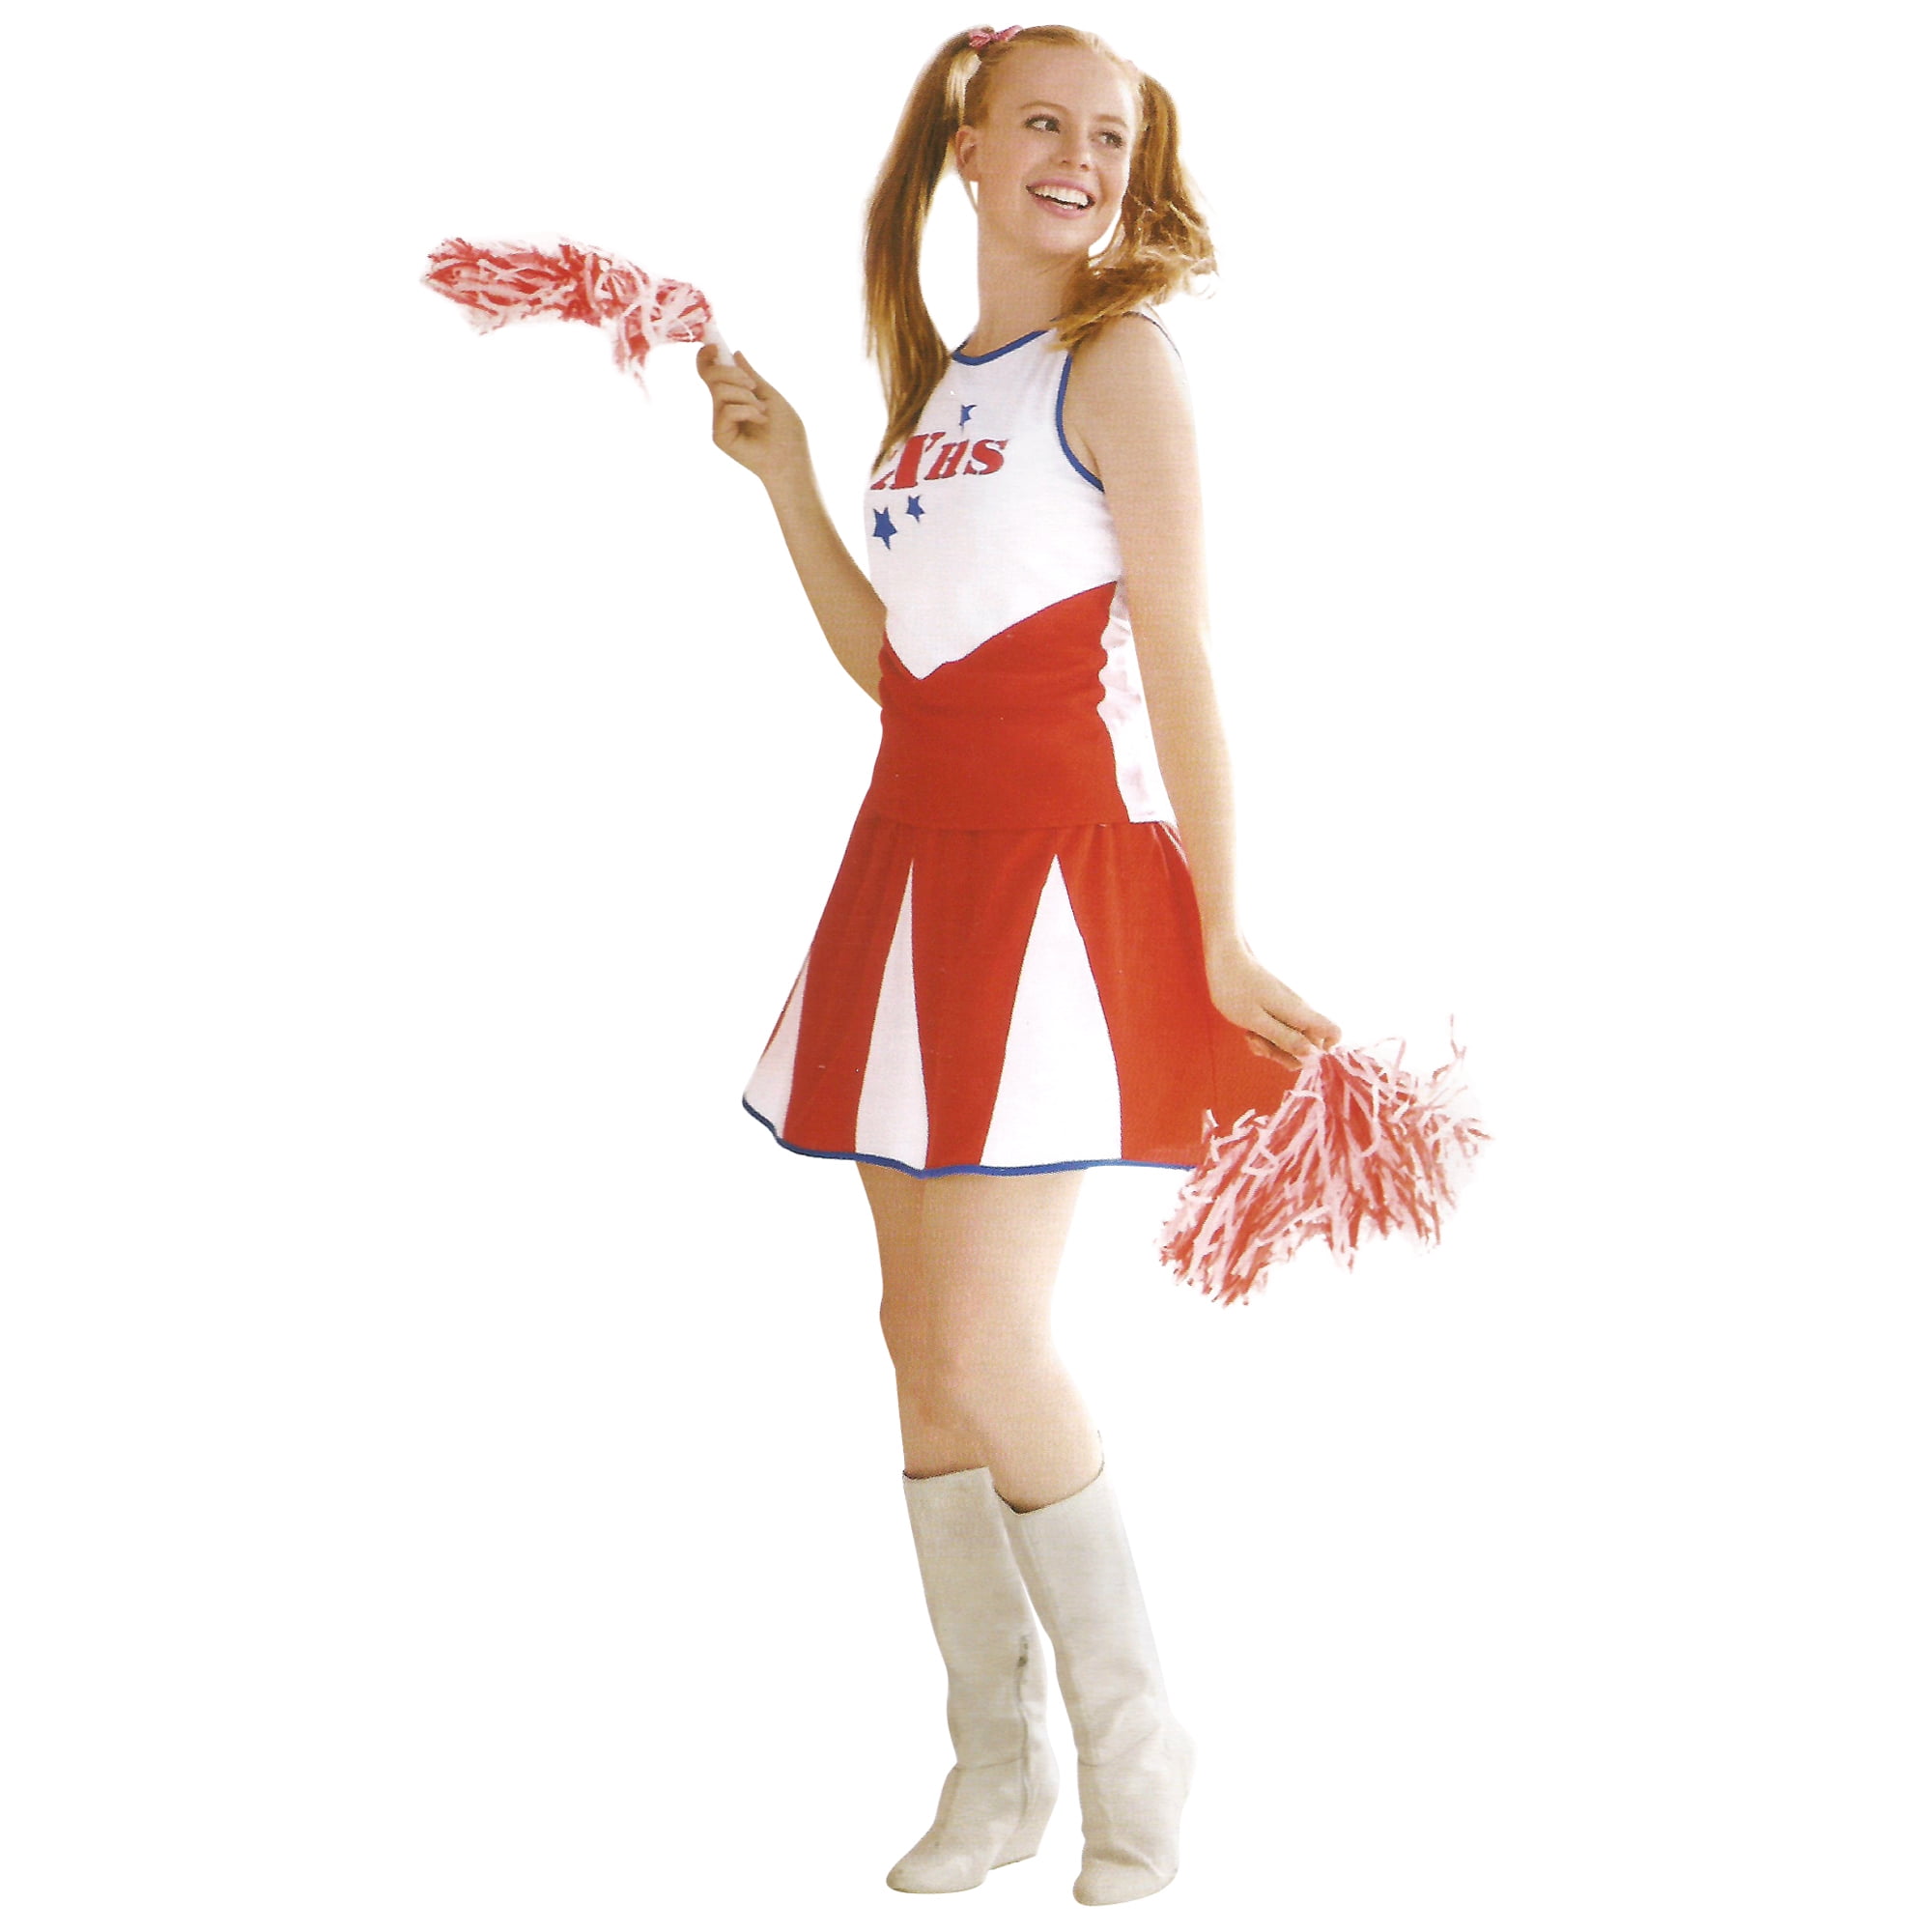 Ladies Cheerleader Fancy Dress Costume & Pom Poms Womens Red Outfit by Smiffys 